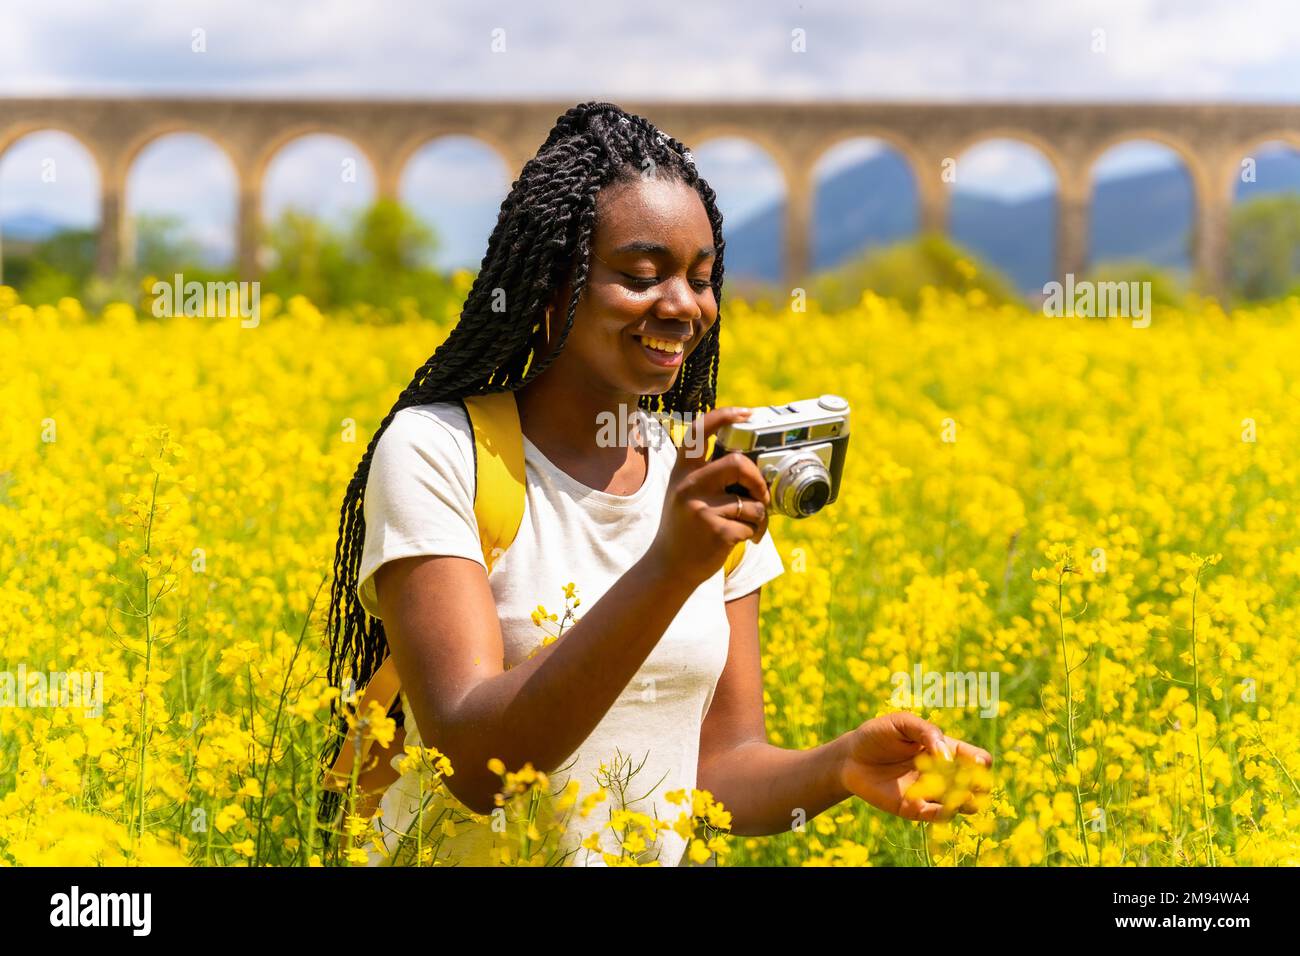 Taking photos of flowers with a vintage camera, a black ethnic girl with braids, a traveler, in a field of yellow flowers Stock Photo